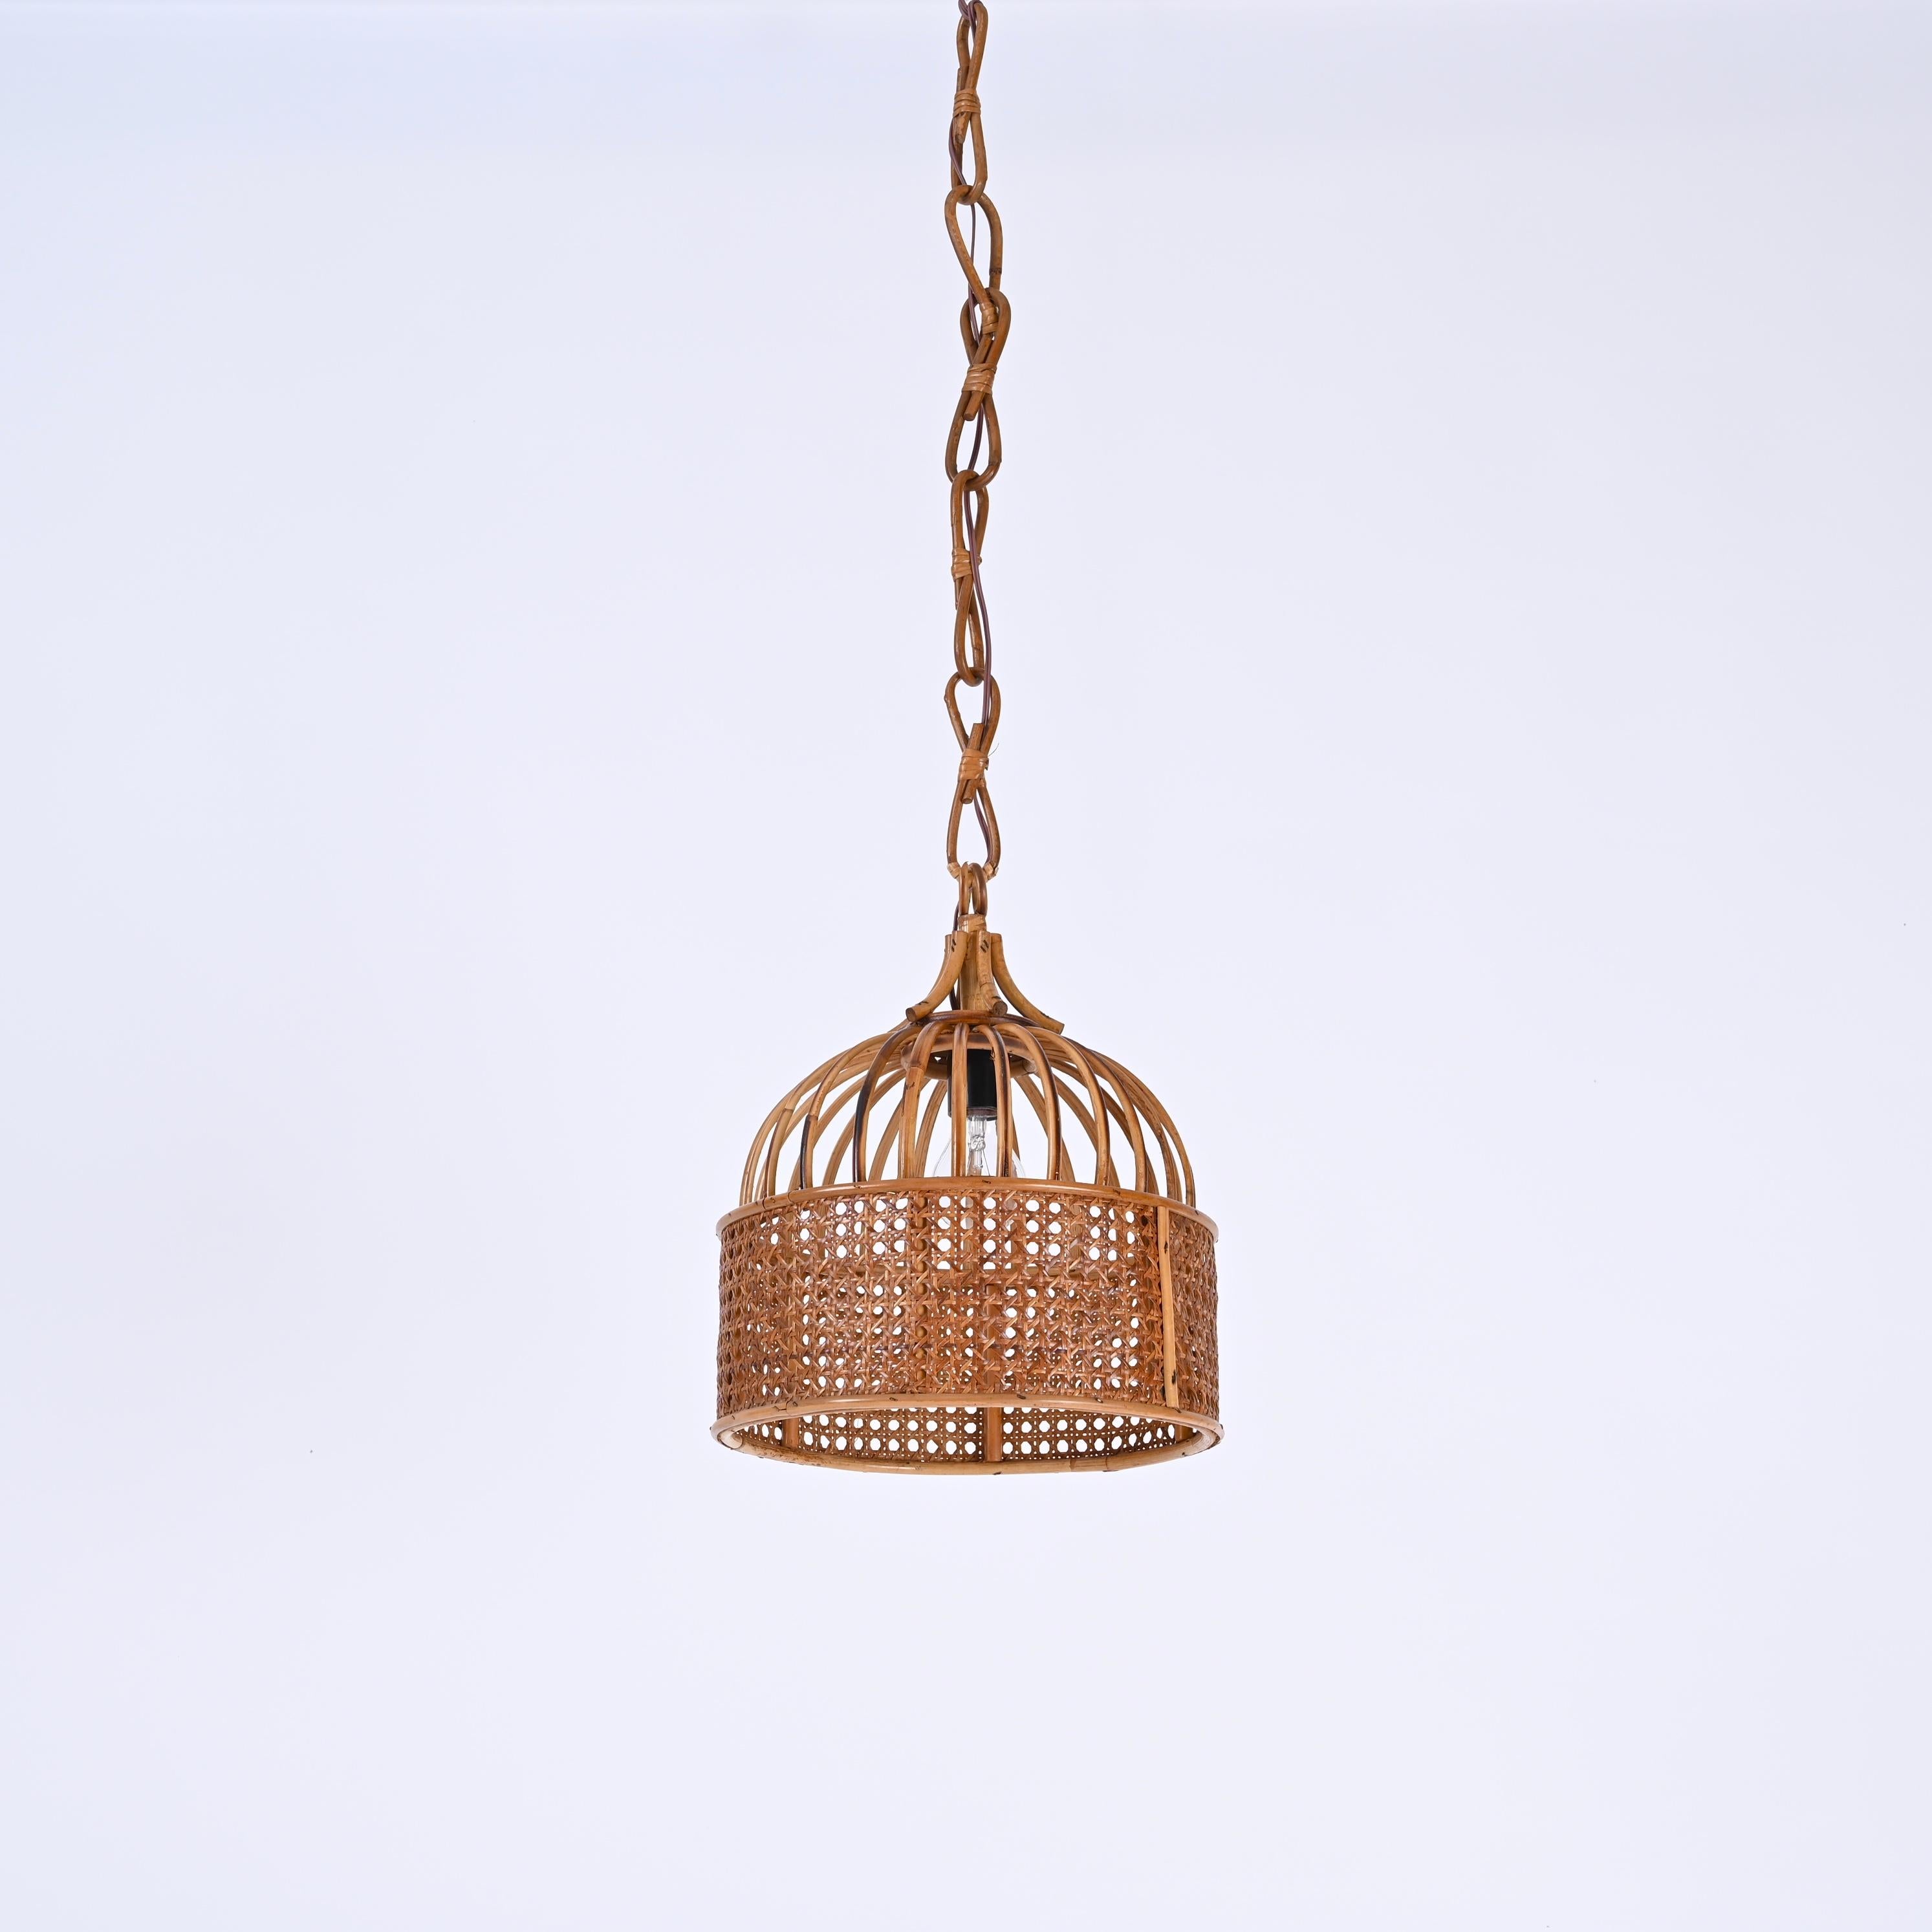 Italian Midcentury French Riviera Round Pendant in Rattan and Wicker, Italy 1970s For Sale